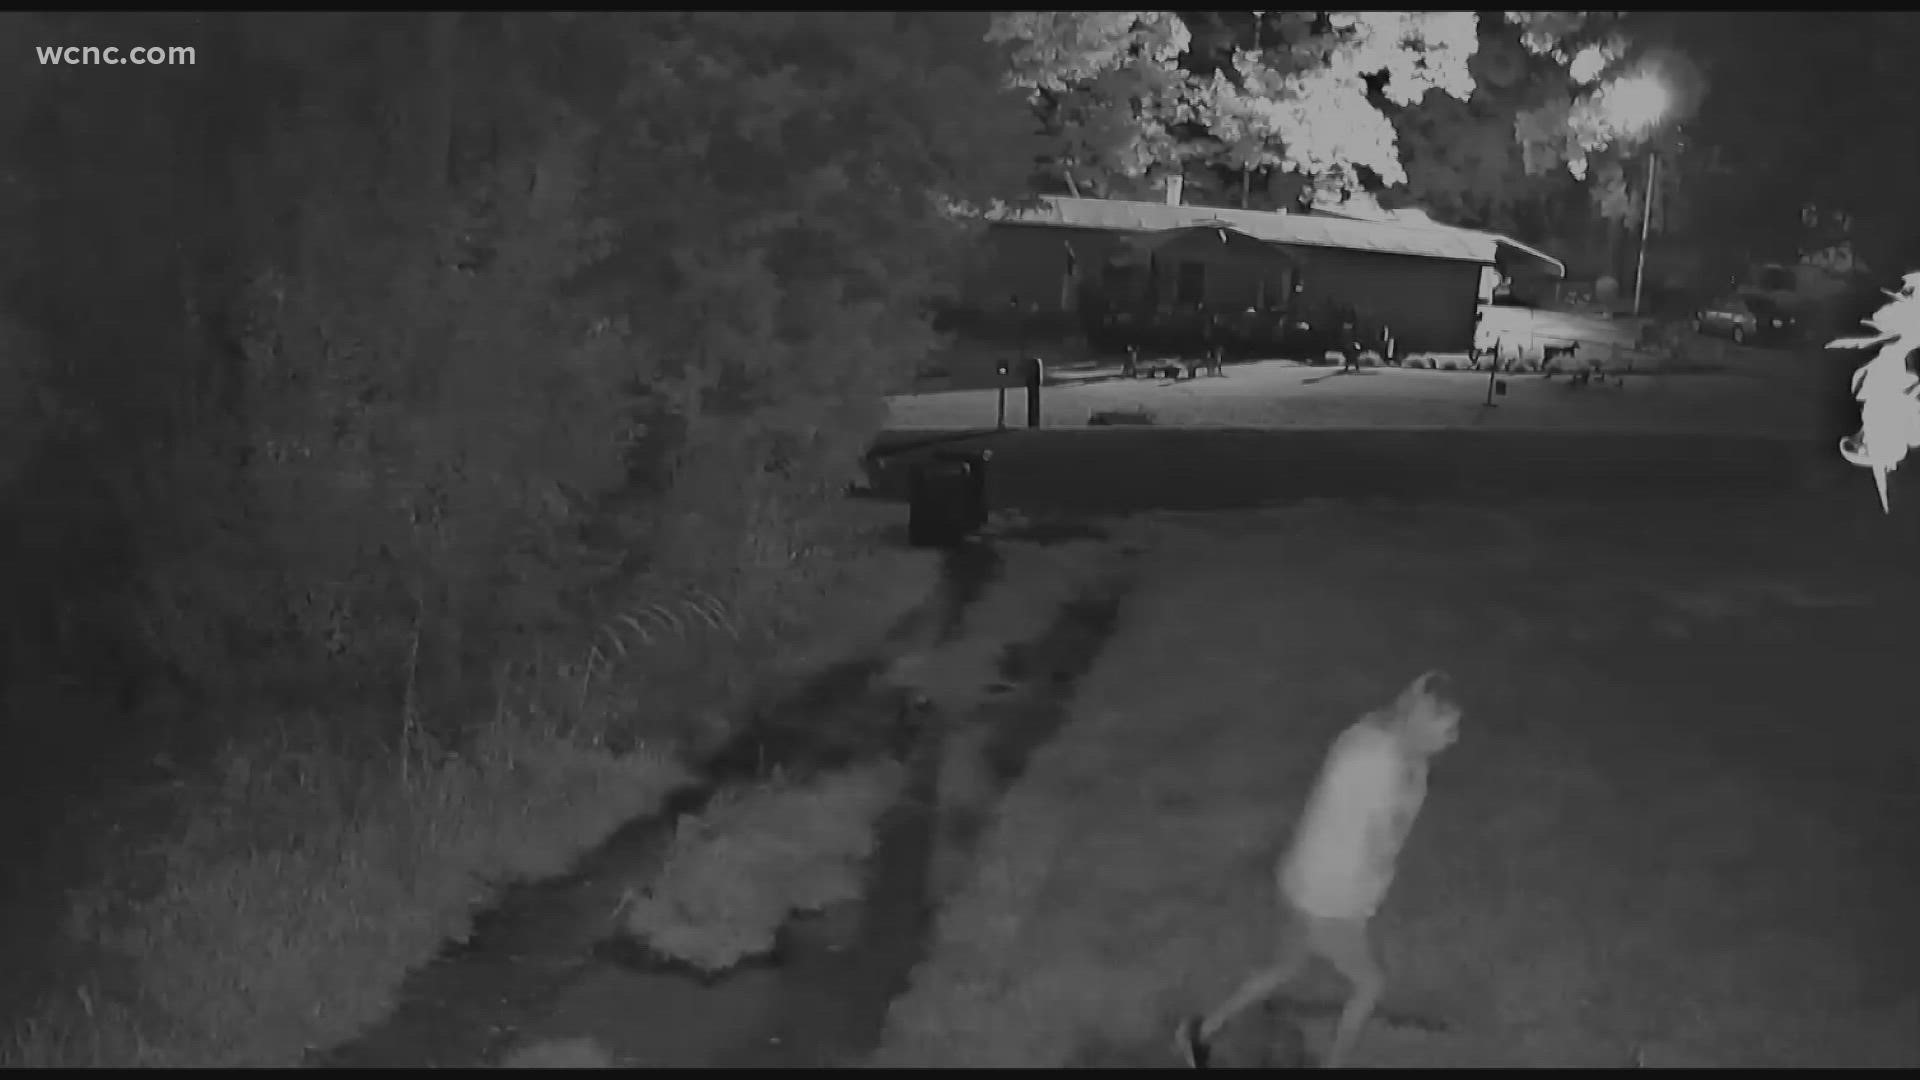 Detectives believe the remains belong to a woman seen in this surveillance footage. But besides her description she was wearing a T-shirt, shorts, and a silicone